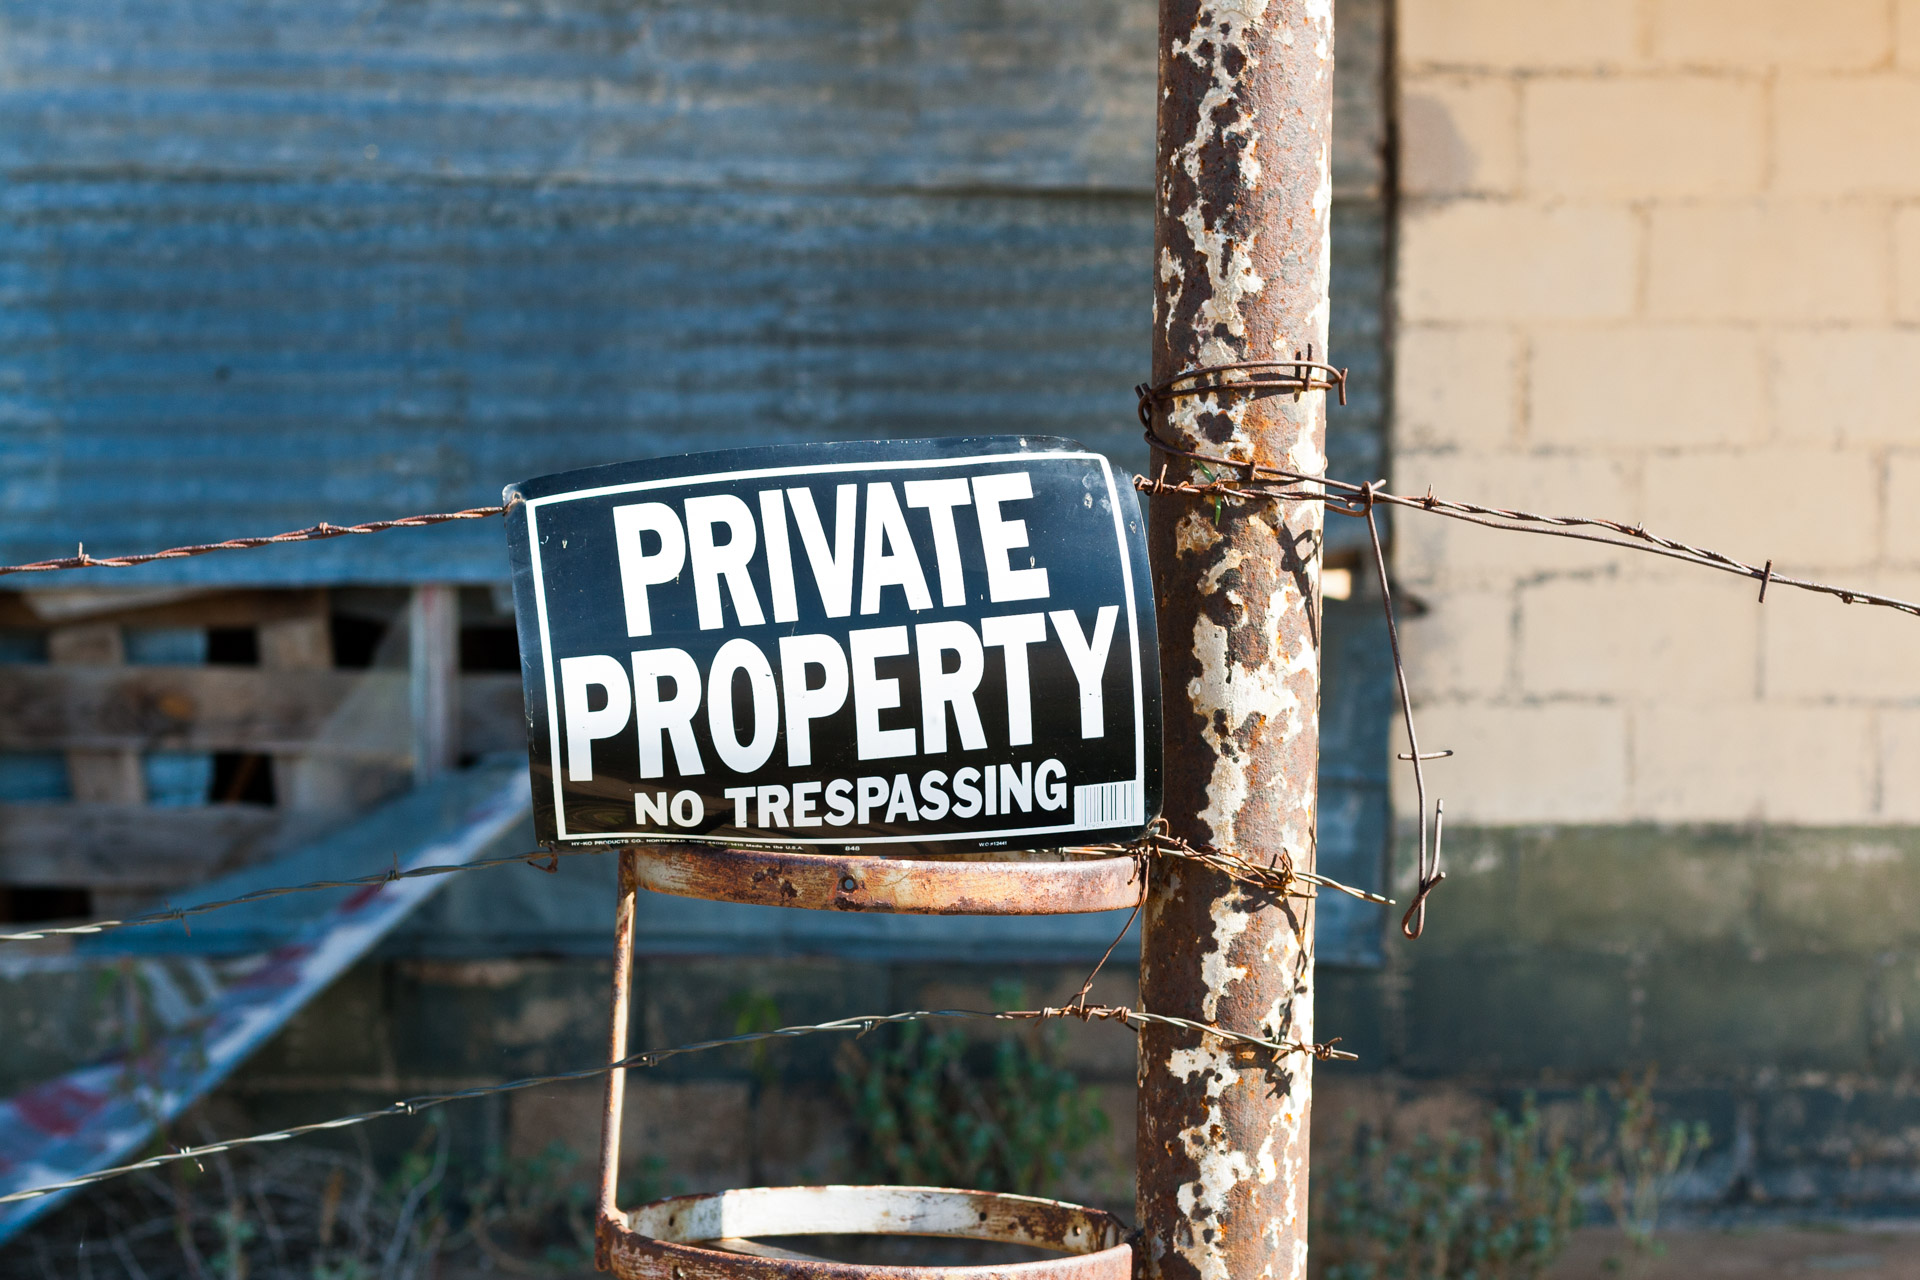 Talpa, Texas - The Falling Tin Store (private property sign)